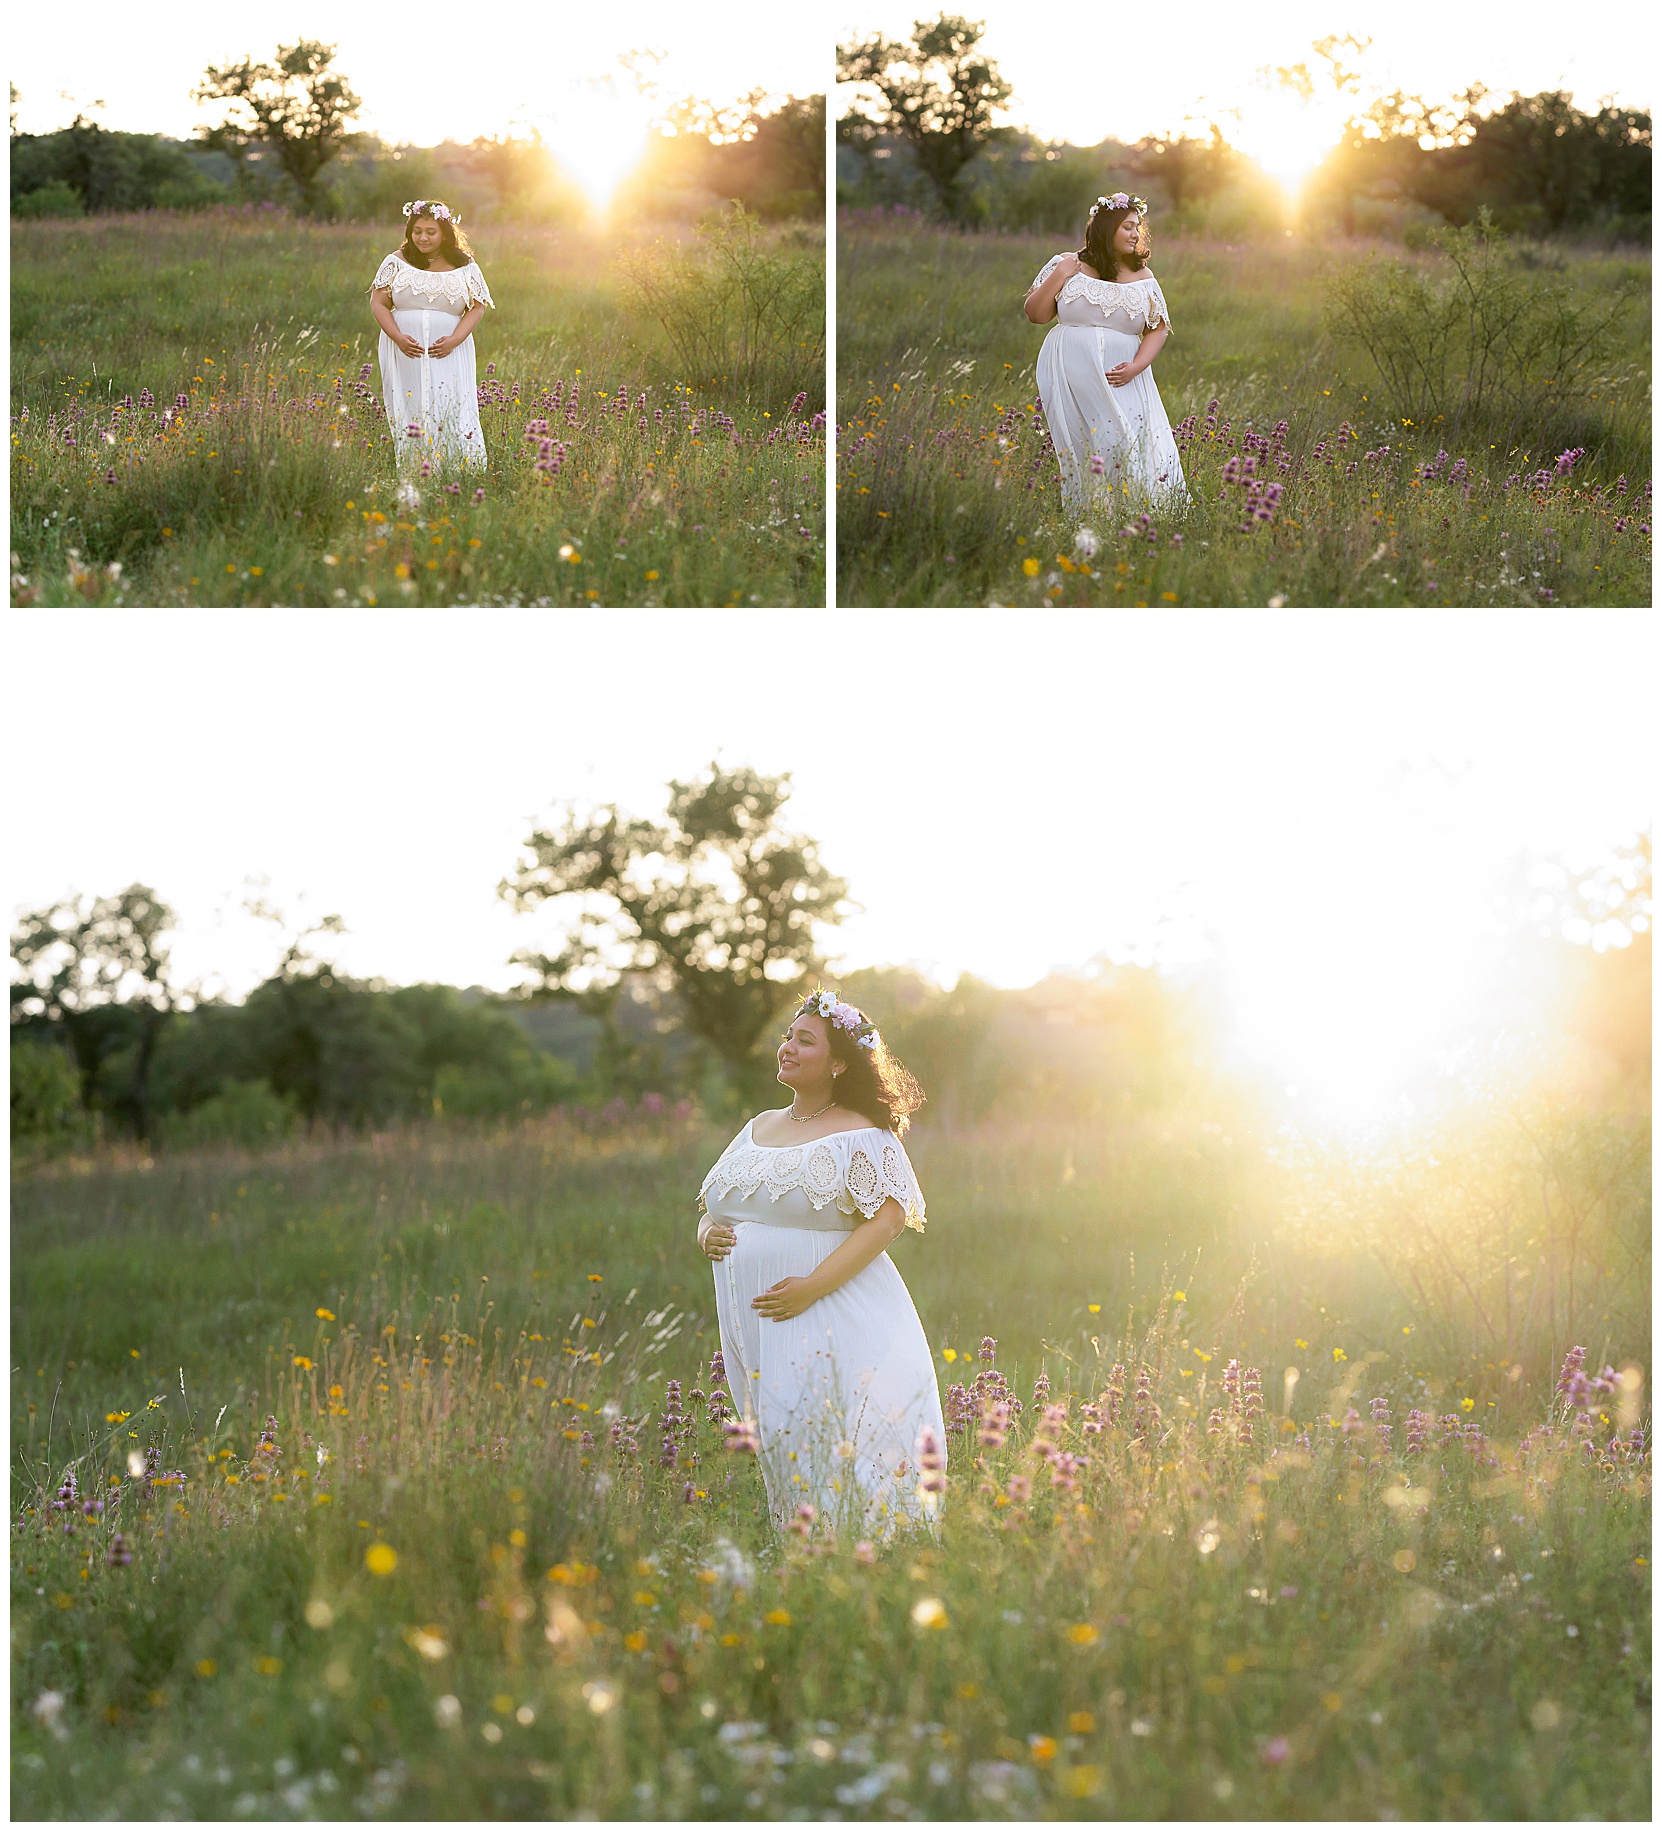 A series of three Texas wildflower maternity photos featuring a pregnant woman in a white dress and a floral headdress standing in front of the sunset in a field of wildflowers.